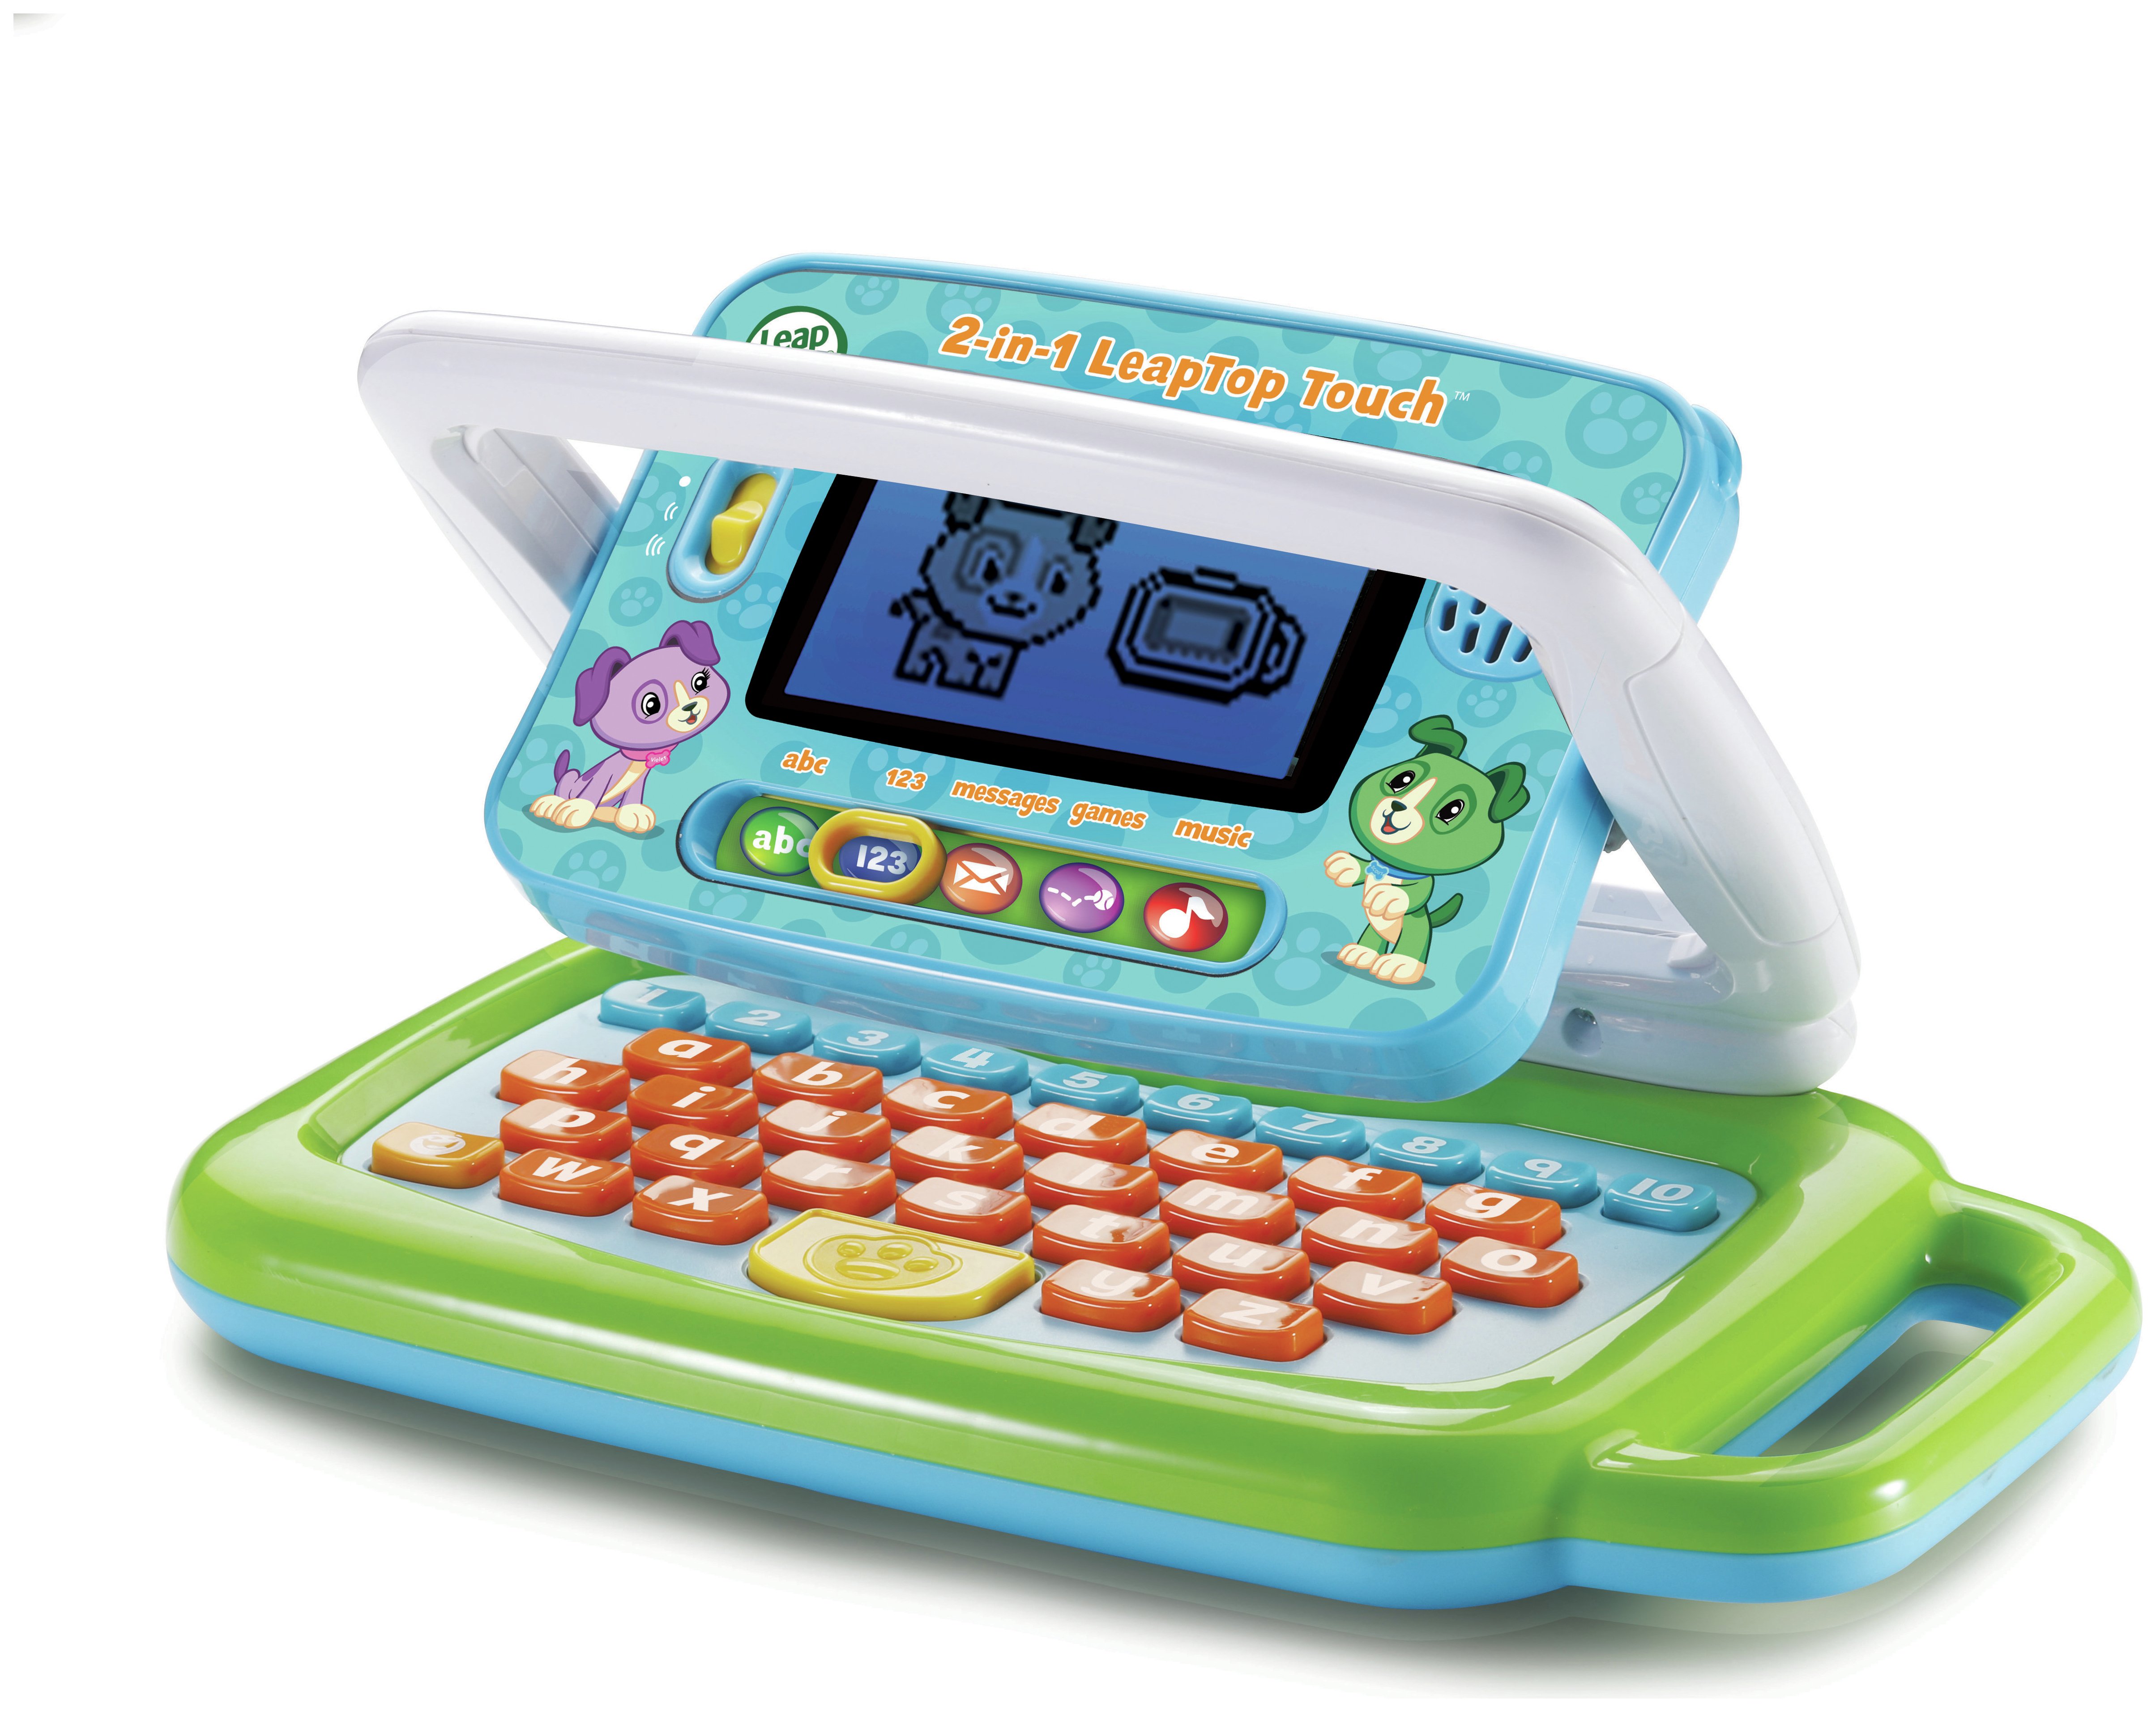 LeapFrog 2 in 1 Laptop Touch Review